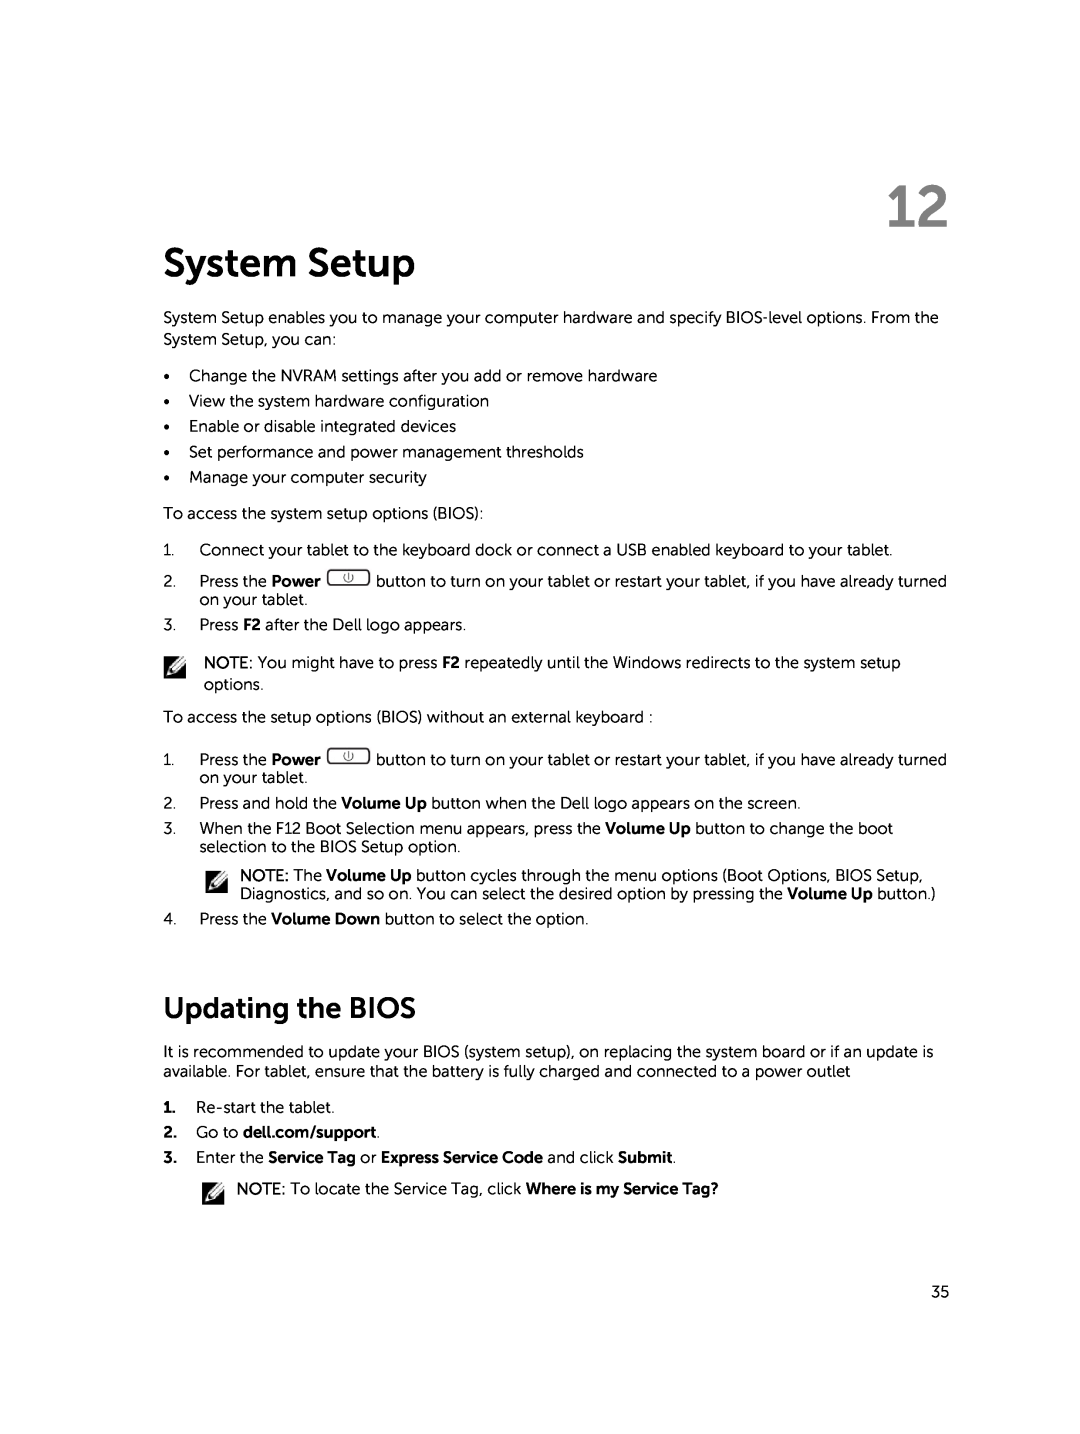 Dell 13-7350 manual System Setup, Updating the BIOS 